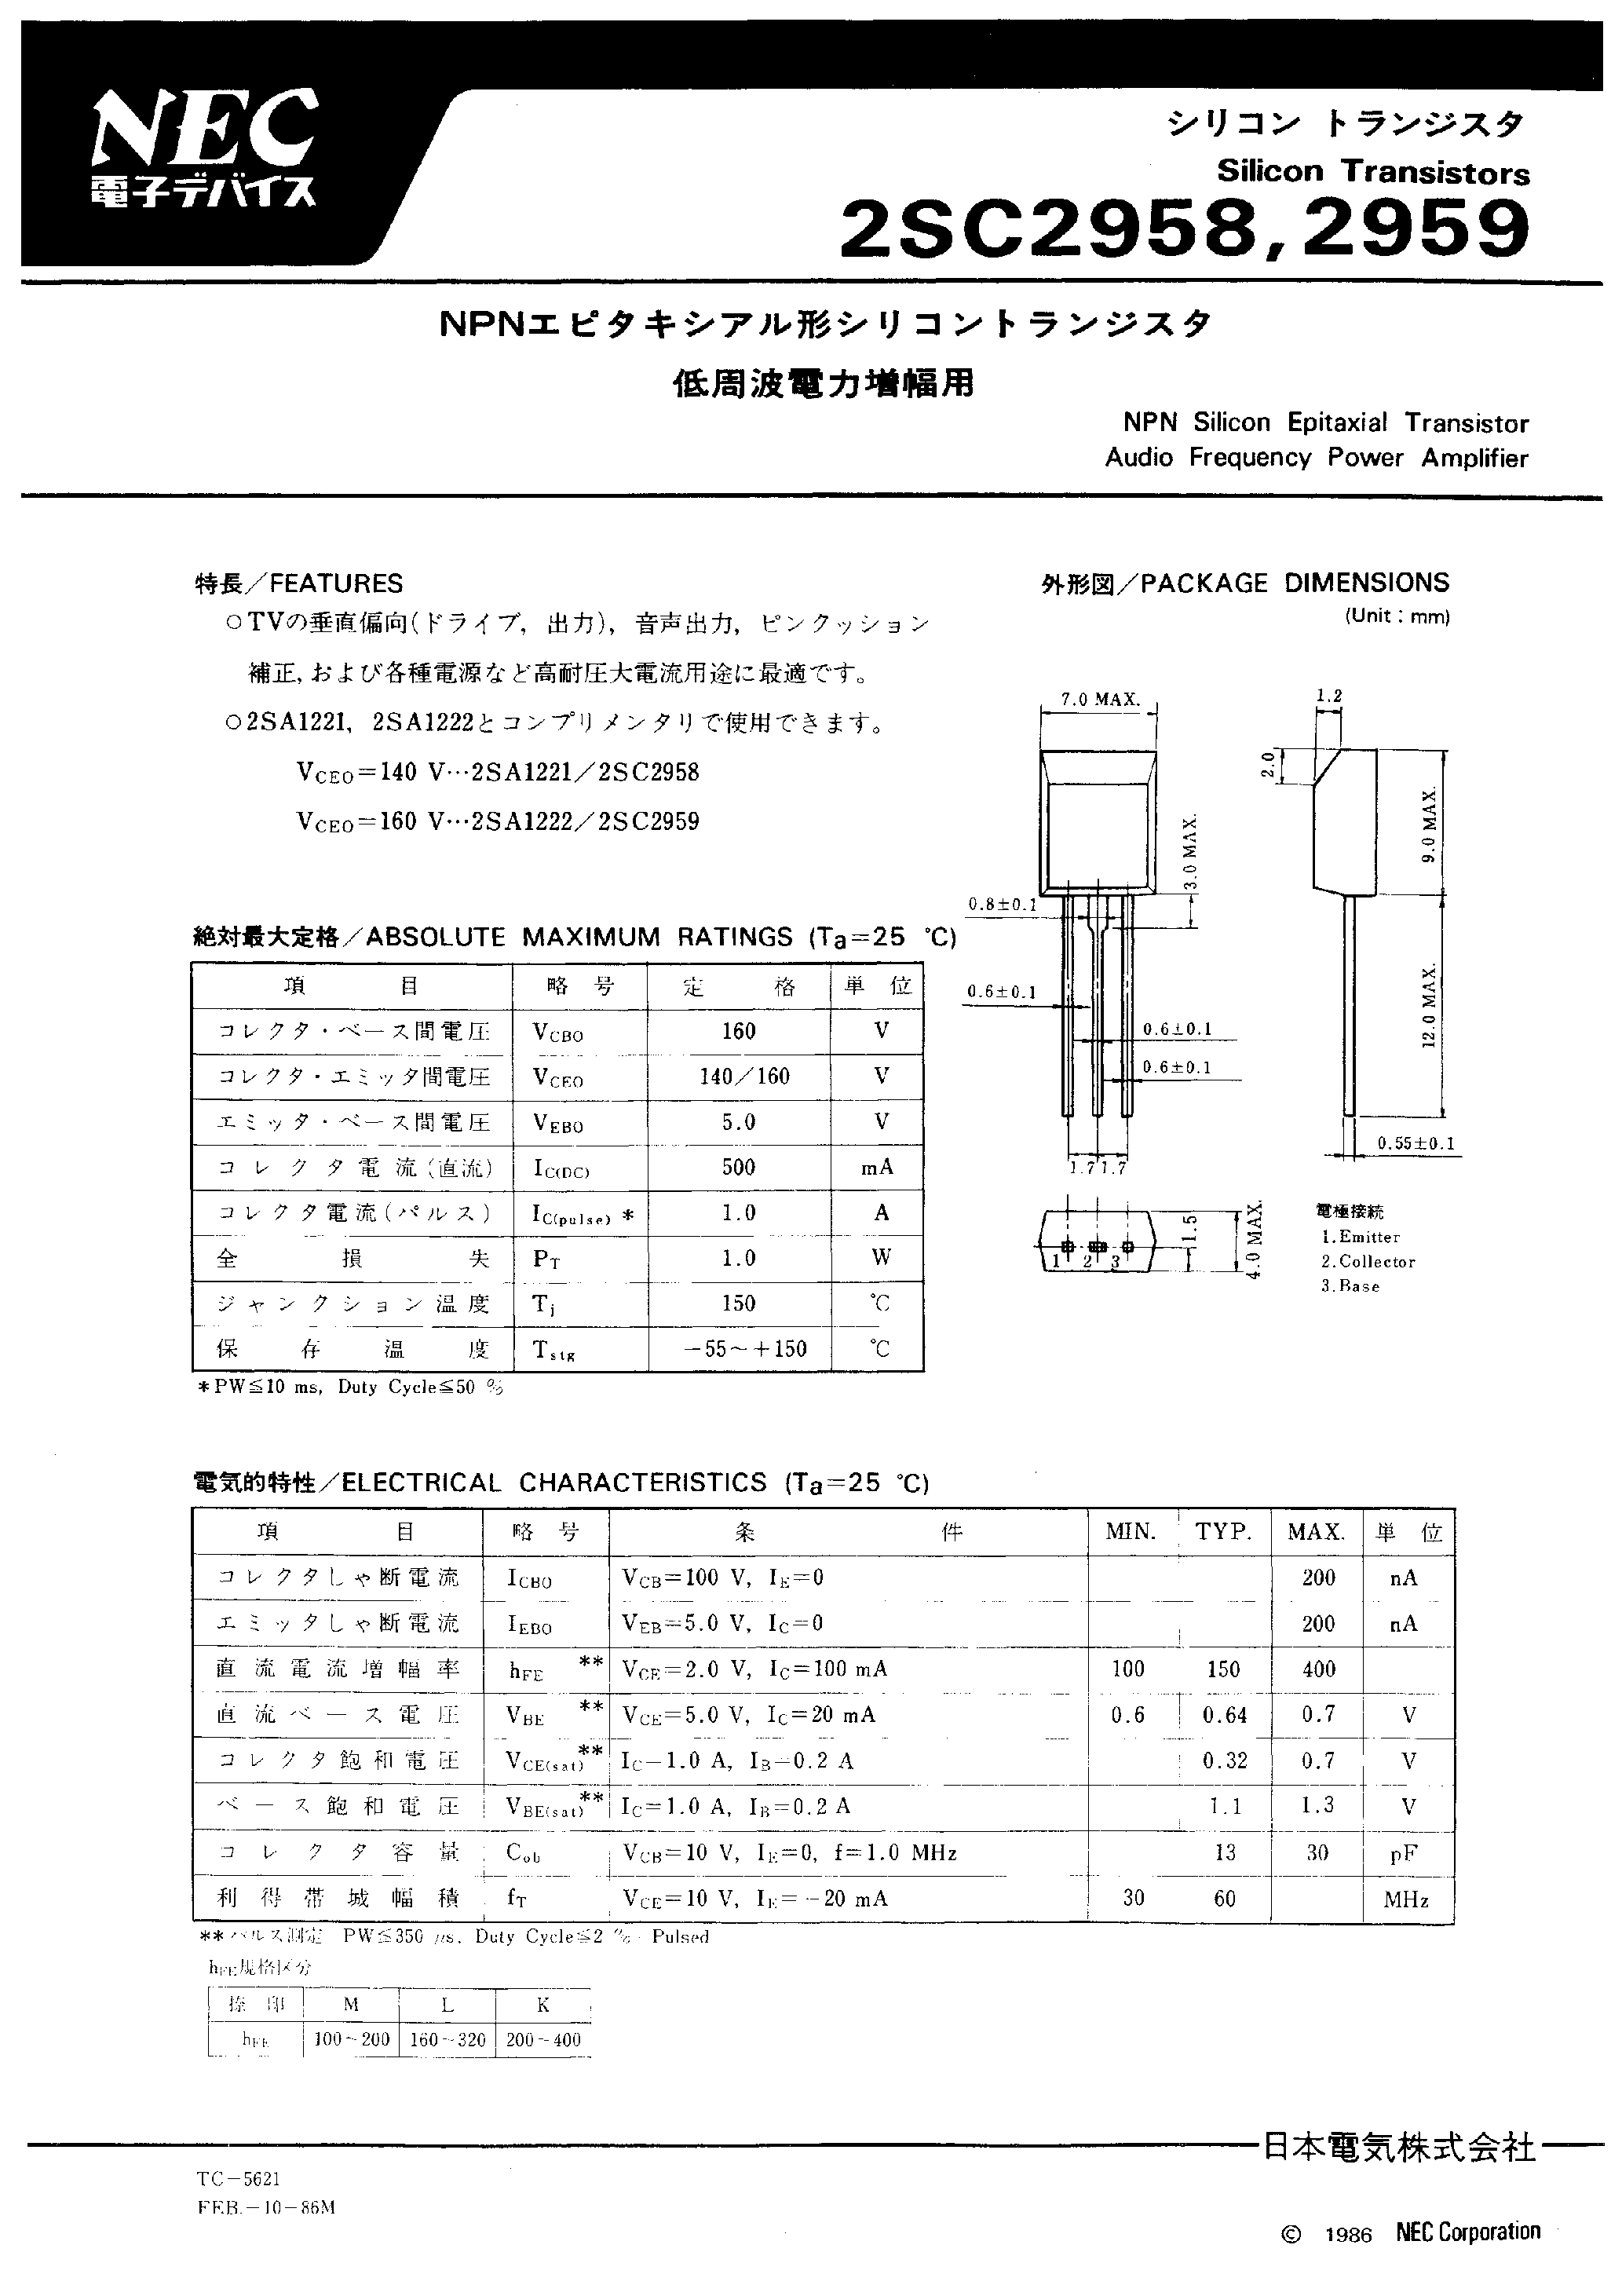 Datasheet 2SC2958 - (2SC2958 / 2SC2959) NPN SILICON EPITAXIAL TRANSISTOR Audio Frequency Power Amplifier page 1